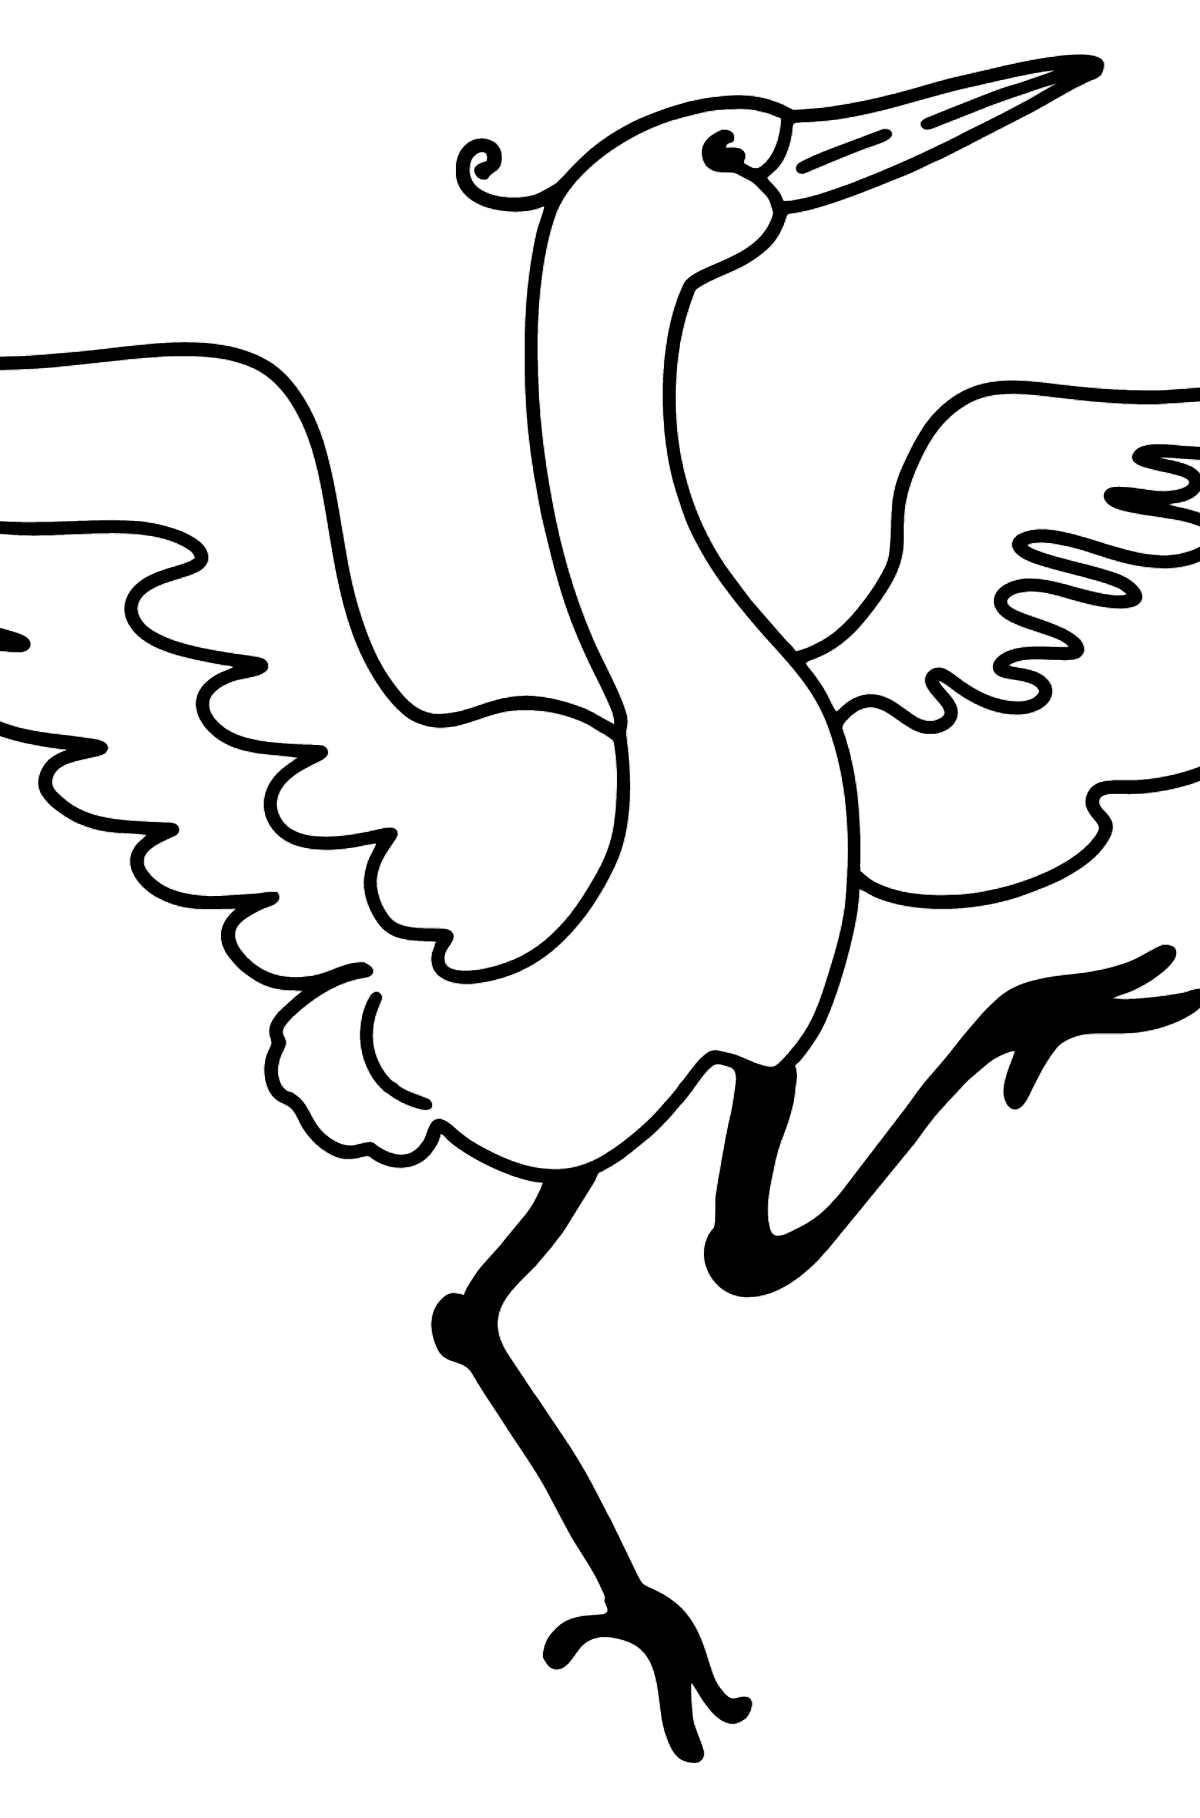 Crane coloring page - Coloring Pages for Kids